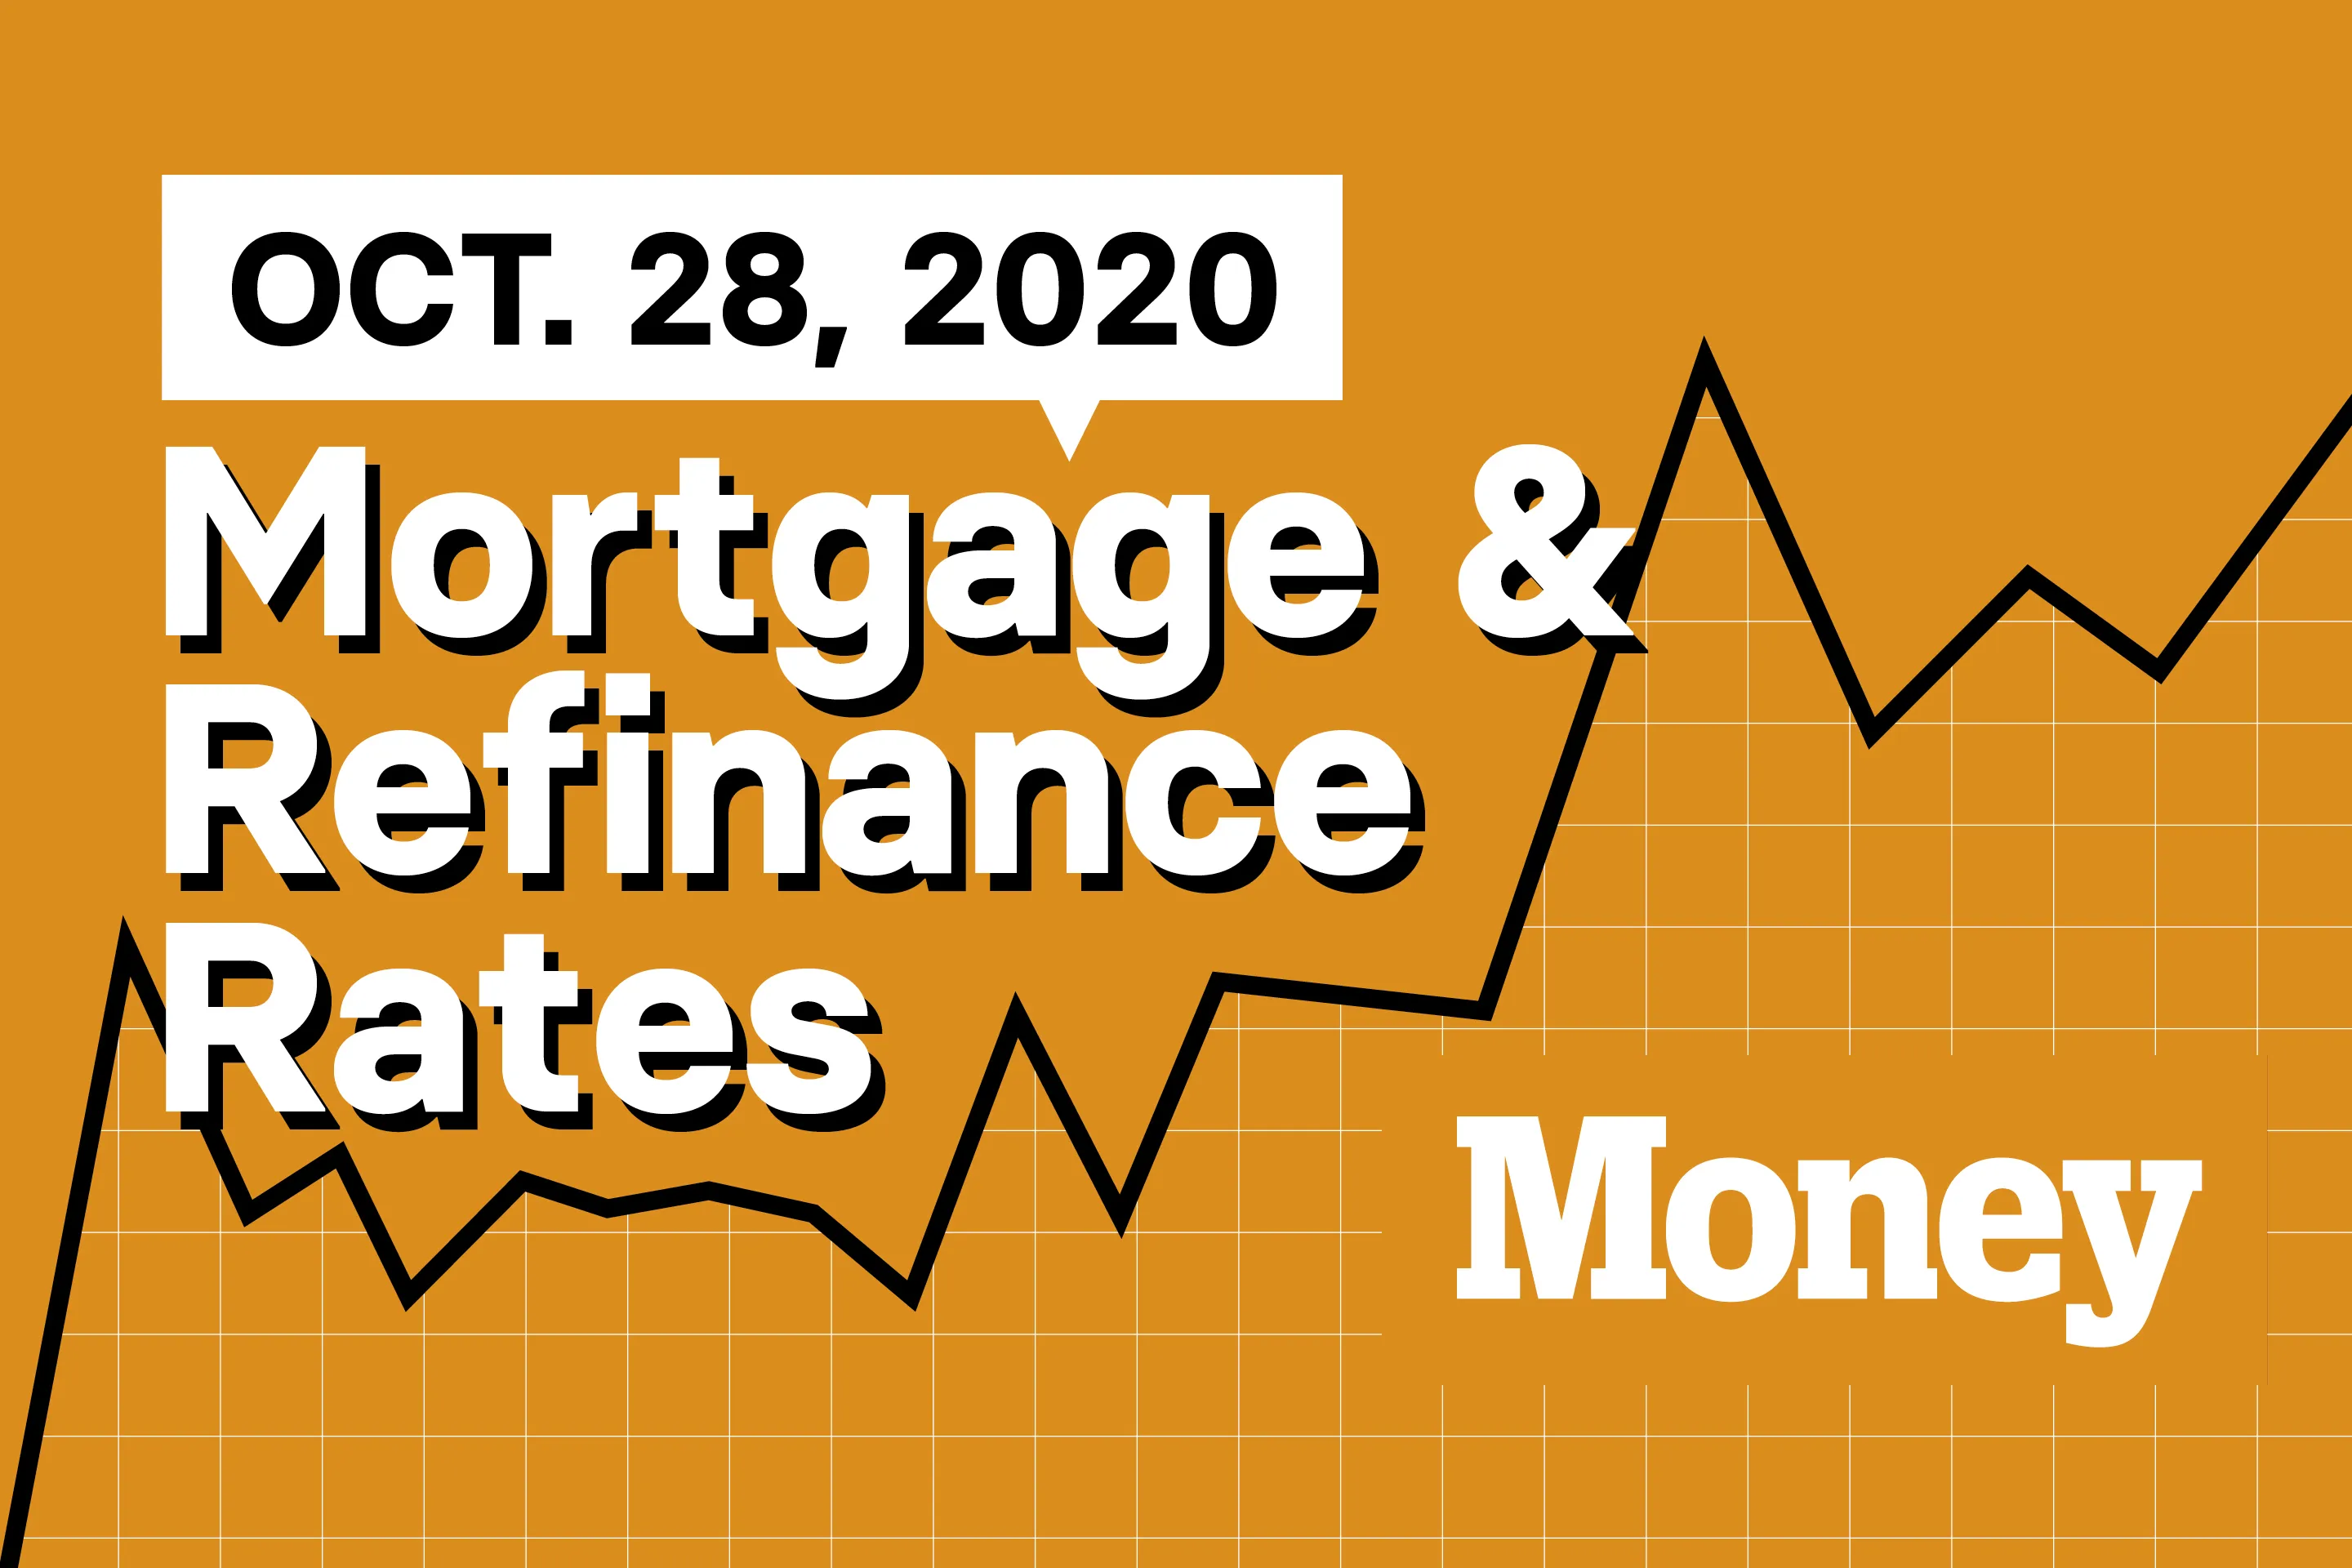 Here Are Today's Best Mortgage & Refinance Rates for October 28, 2020